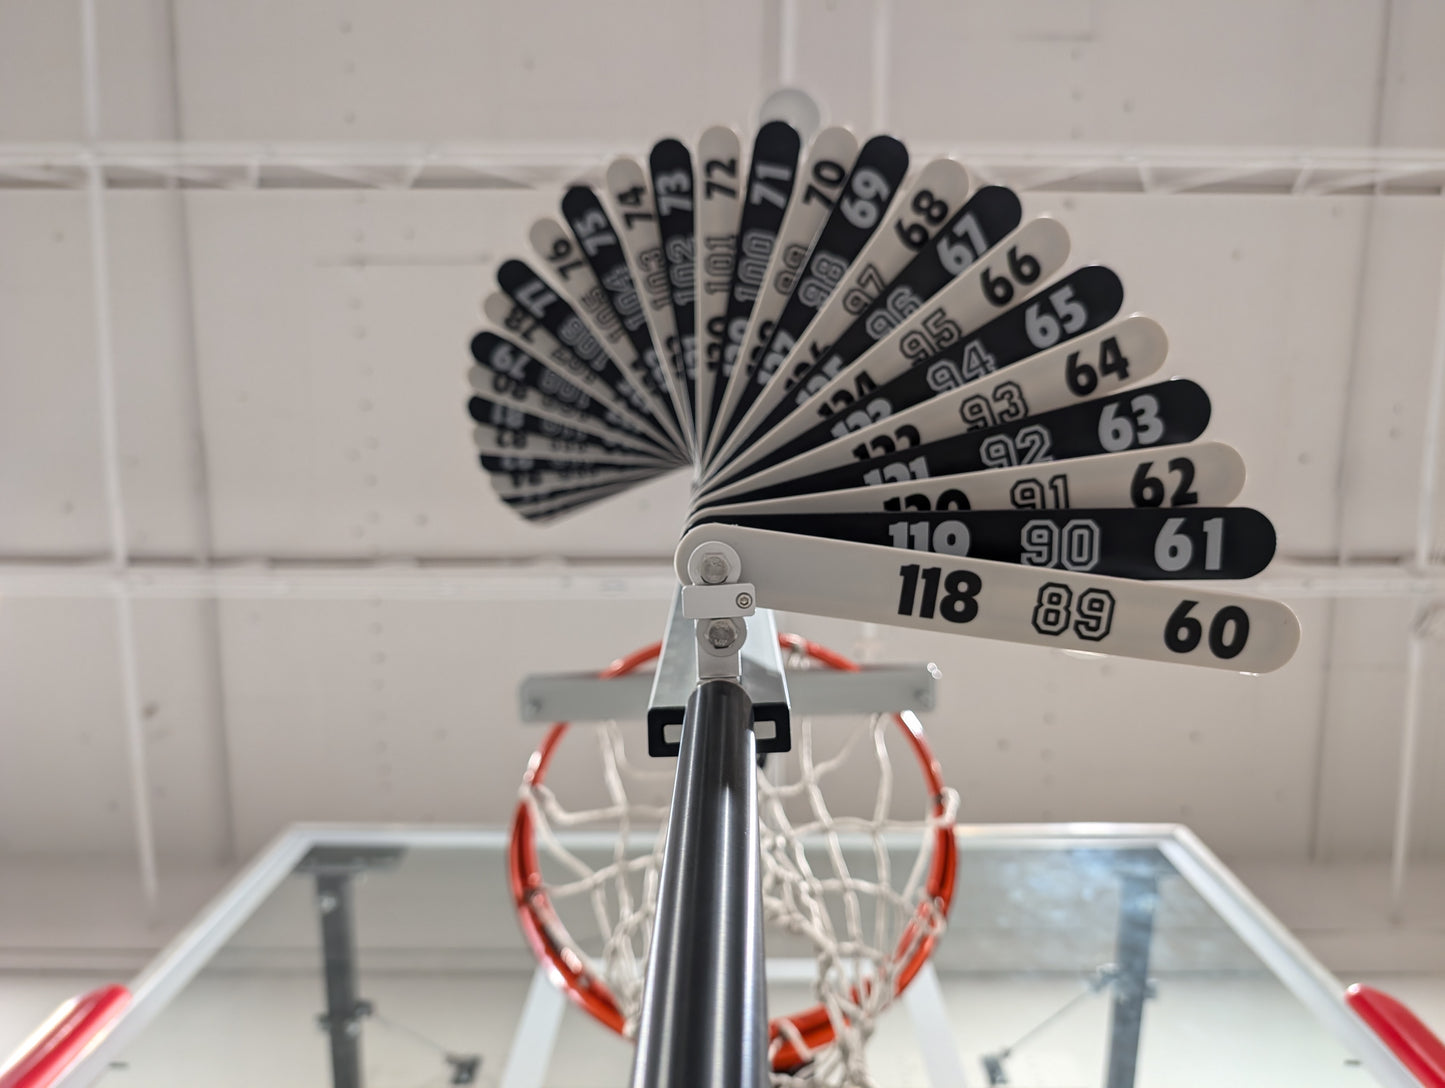 TH1000 Basketball Rim Mounted System